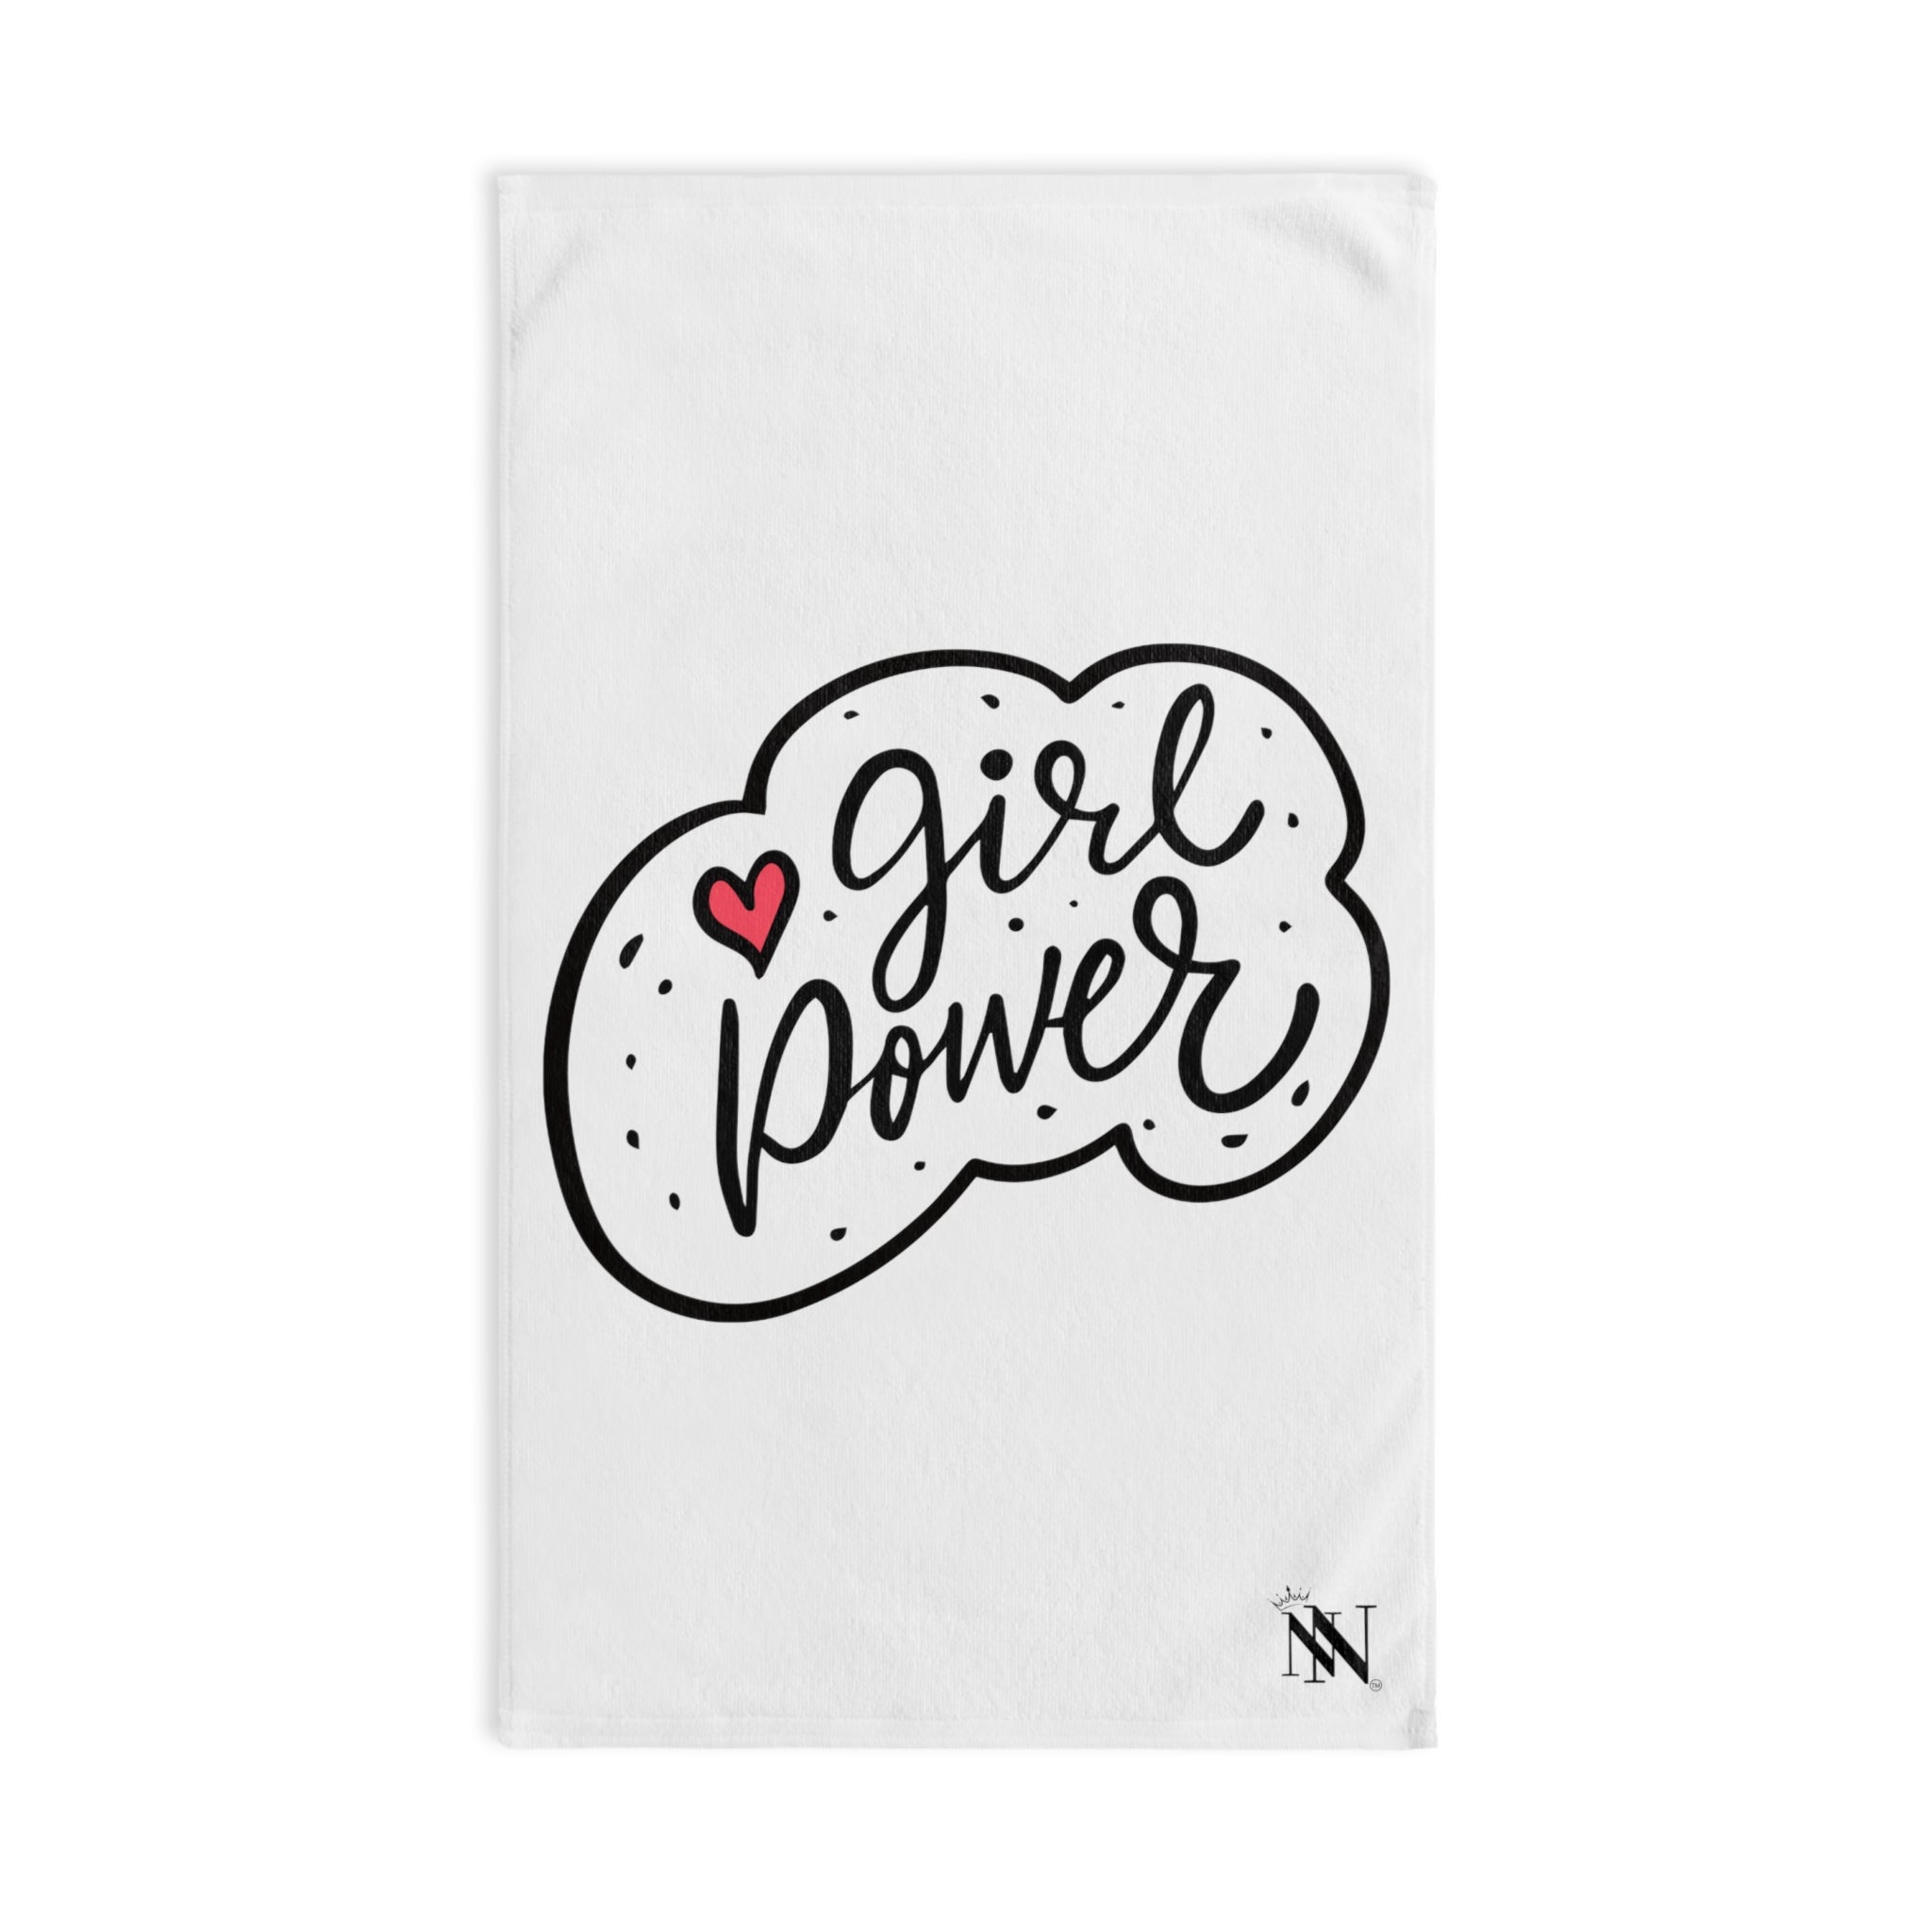 Girl Power Empower White | Funny Gifts for Men - Gifts for Him - Birthday Gifts for Men, Him, Her, Husband, Boyfriend, Girlfriend, New Couple Gifts, Fathers & Valentines Day Gifts, Christmas Gifts NECTAR NAPKINS